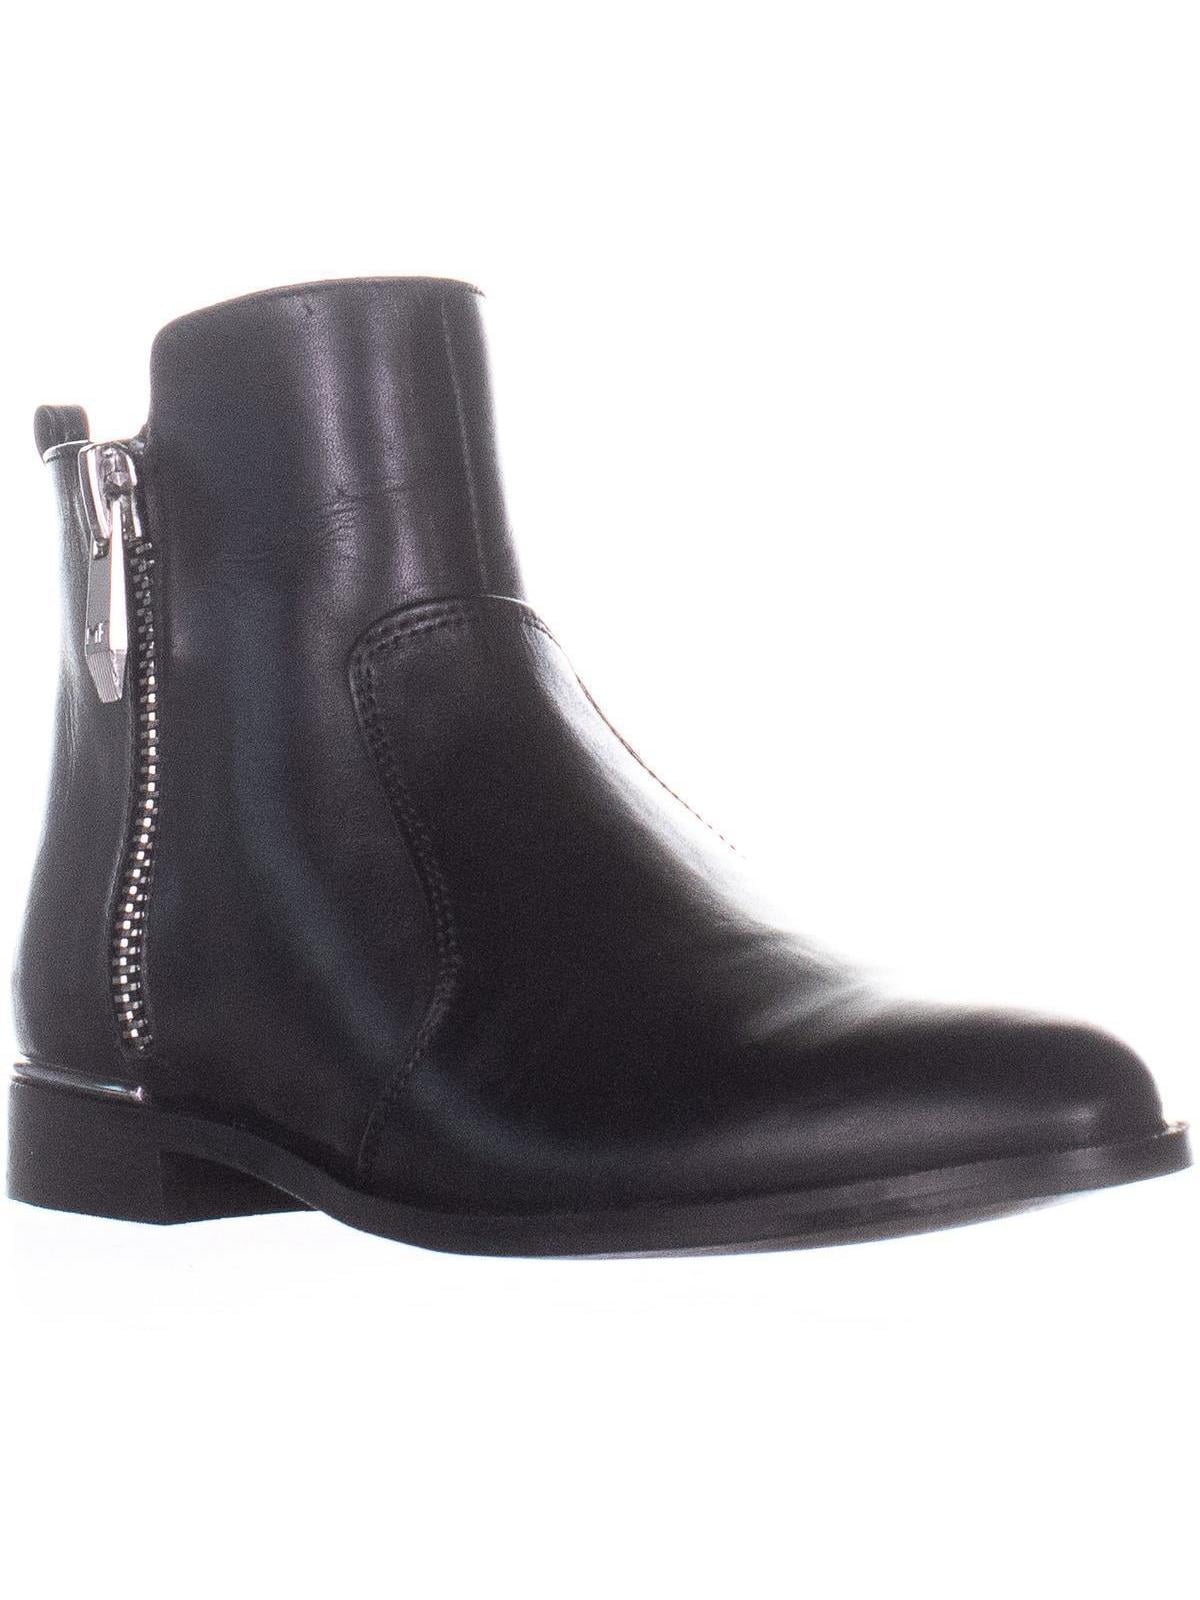 Womens Marc Fisher Rail Ankle Boots, Black Leather, 8 US - Walmart.com